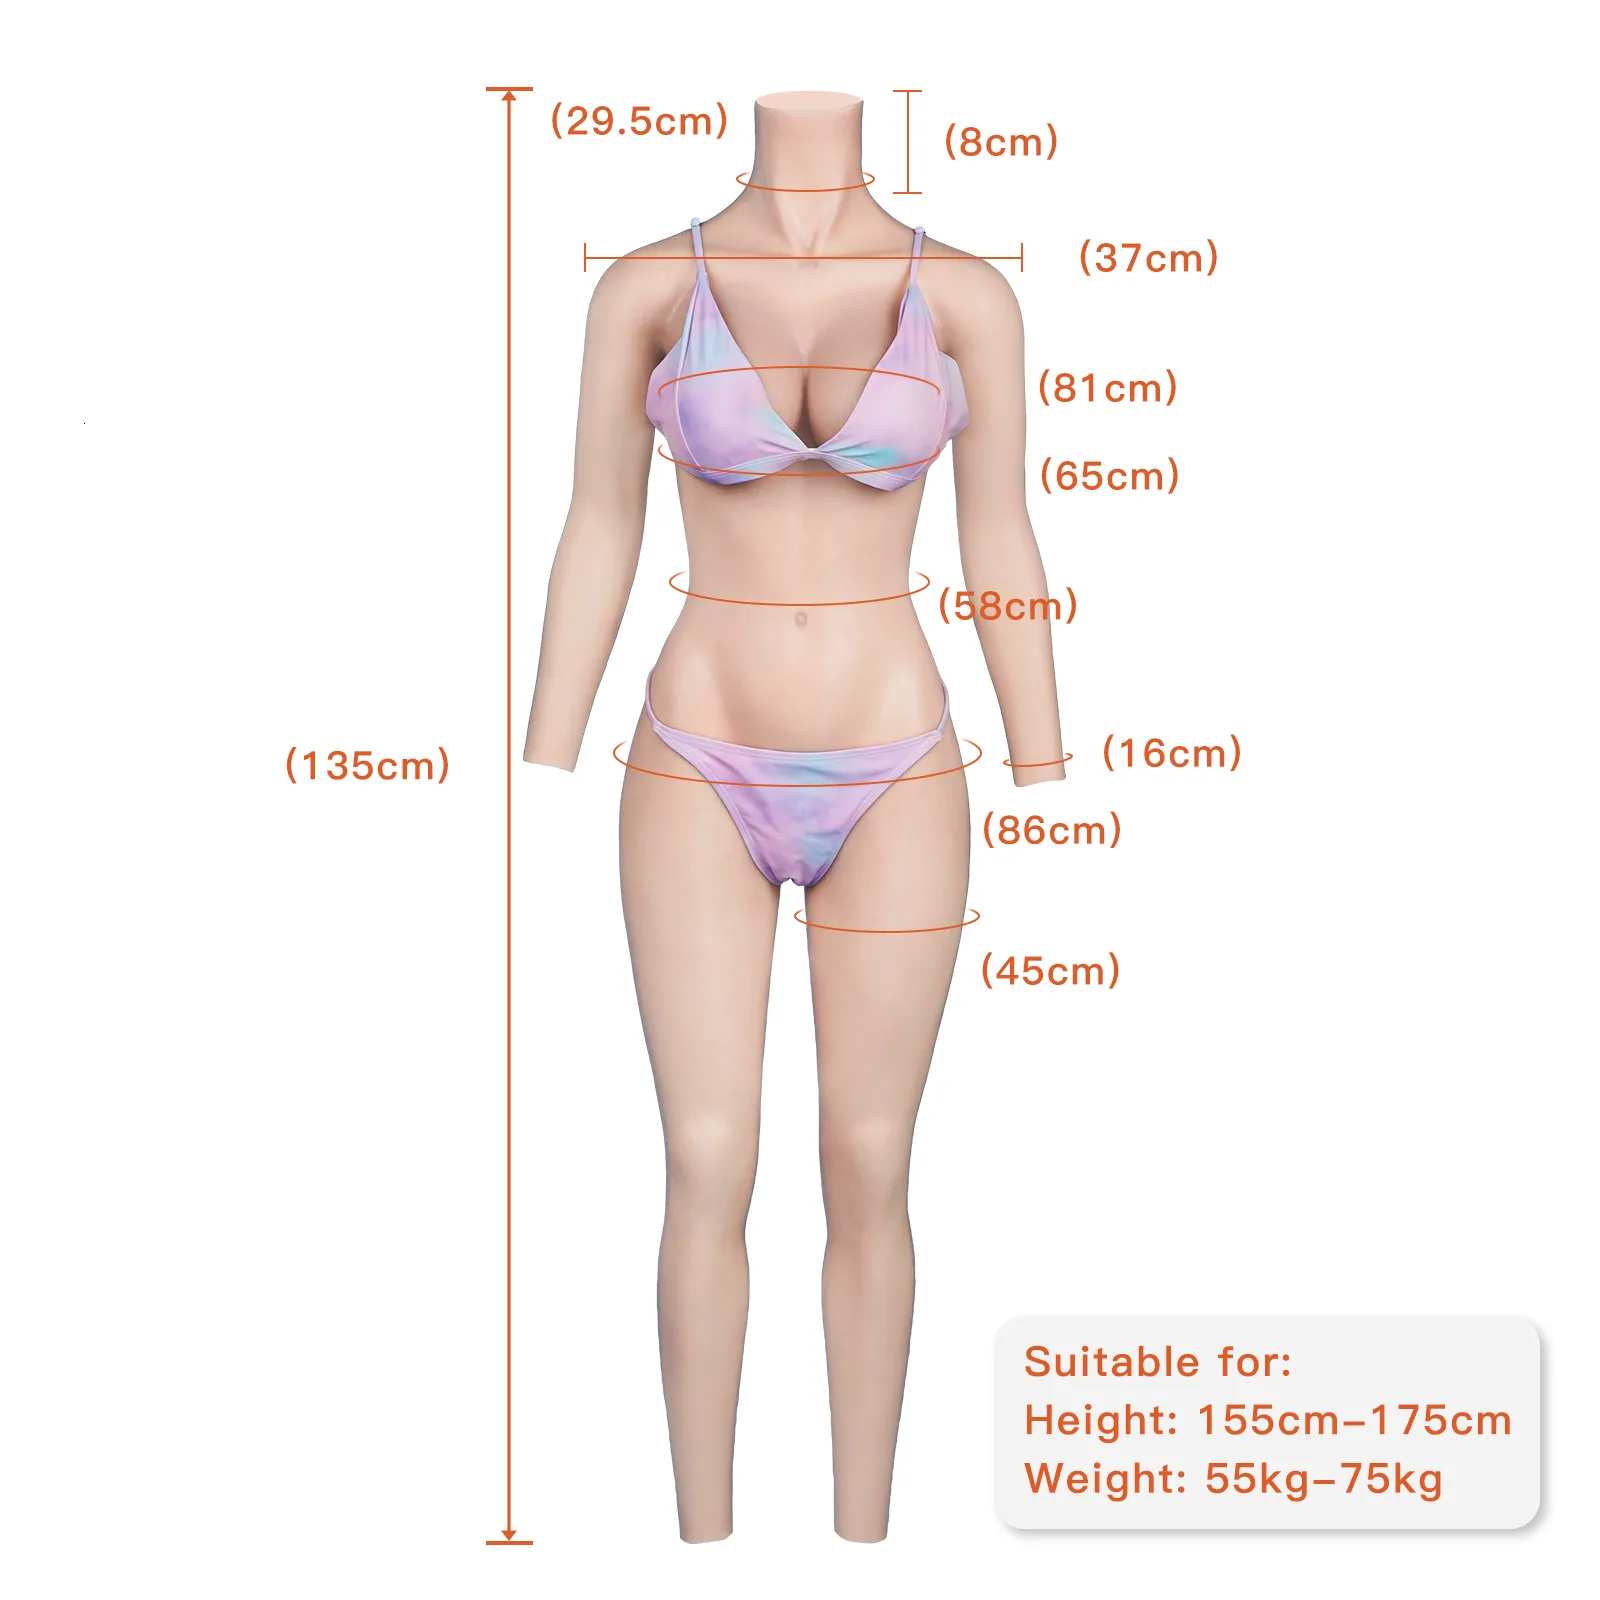 KUMIHO C Cup Silicone Bodysuit for Crossdressing - Transgender Cosplay,  Full Body Suit with Artificial Vagina